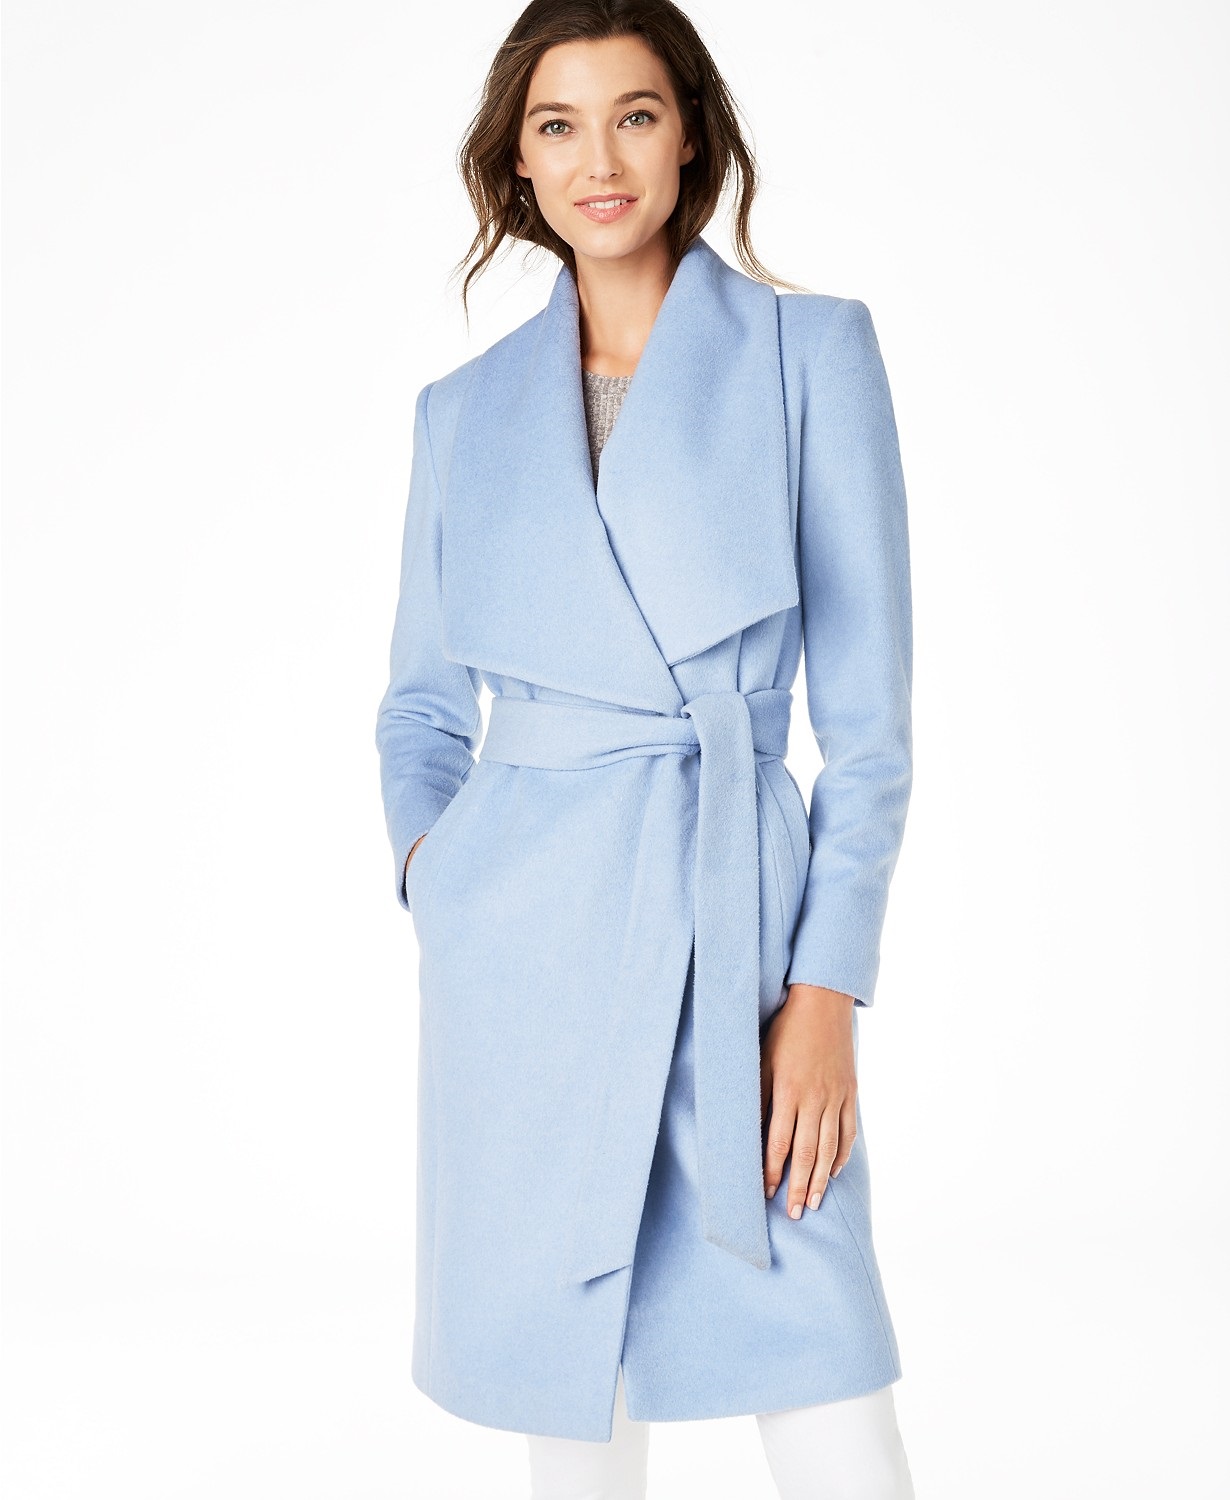 Monochromatic style, monochromatic outfits, pale blue outfit, Cole Haan ice blue wrap coat